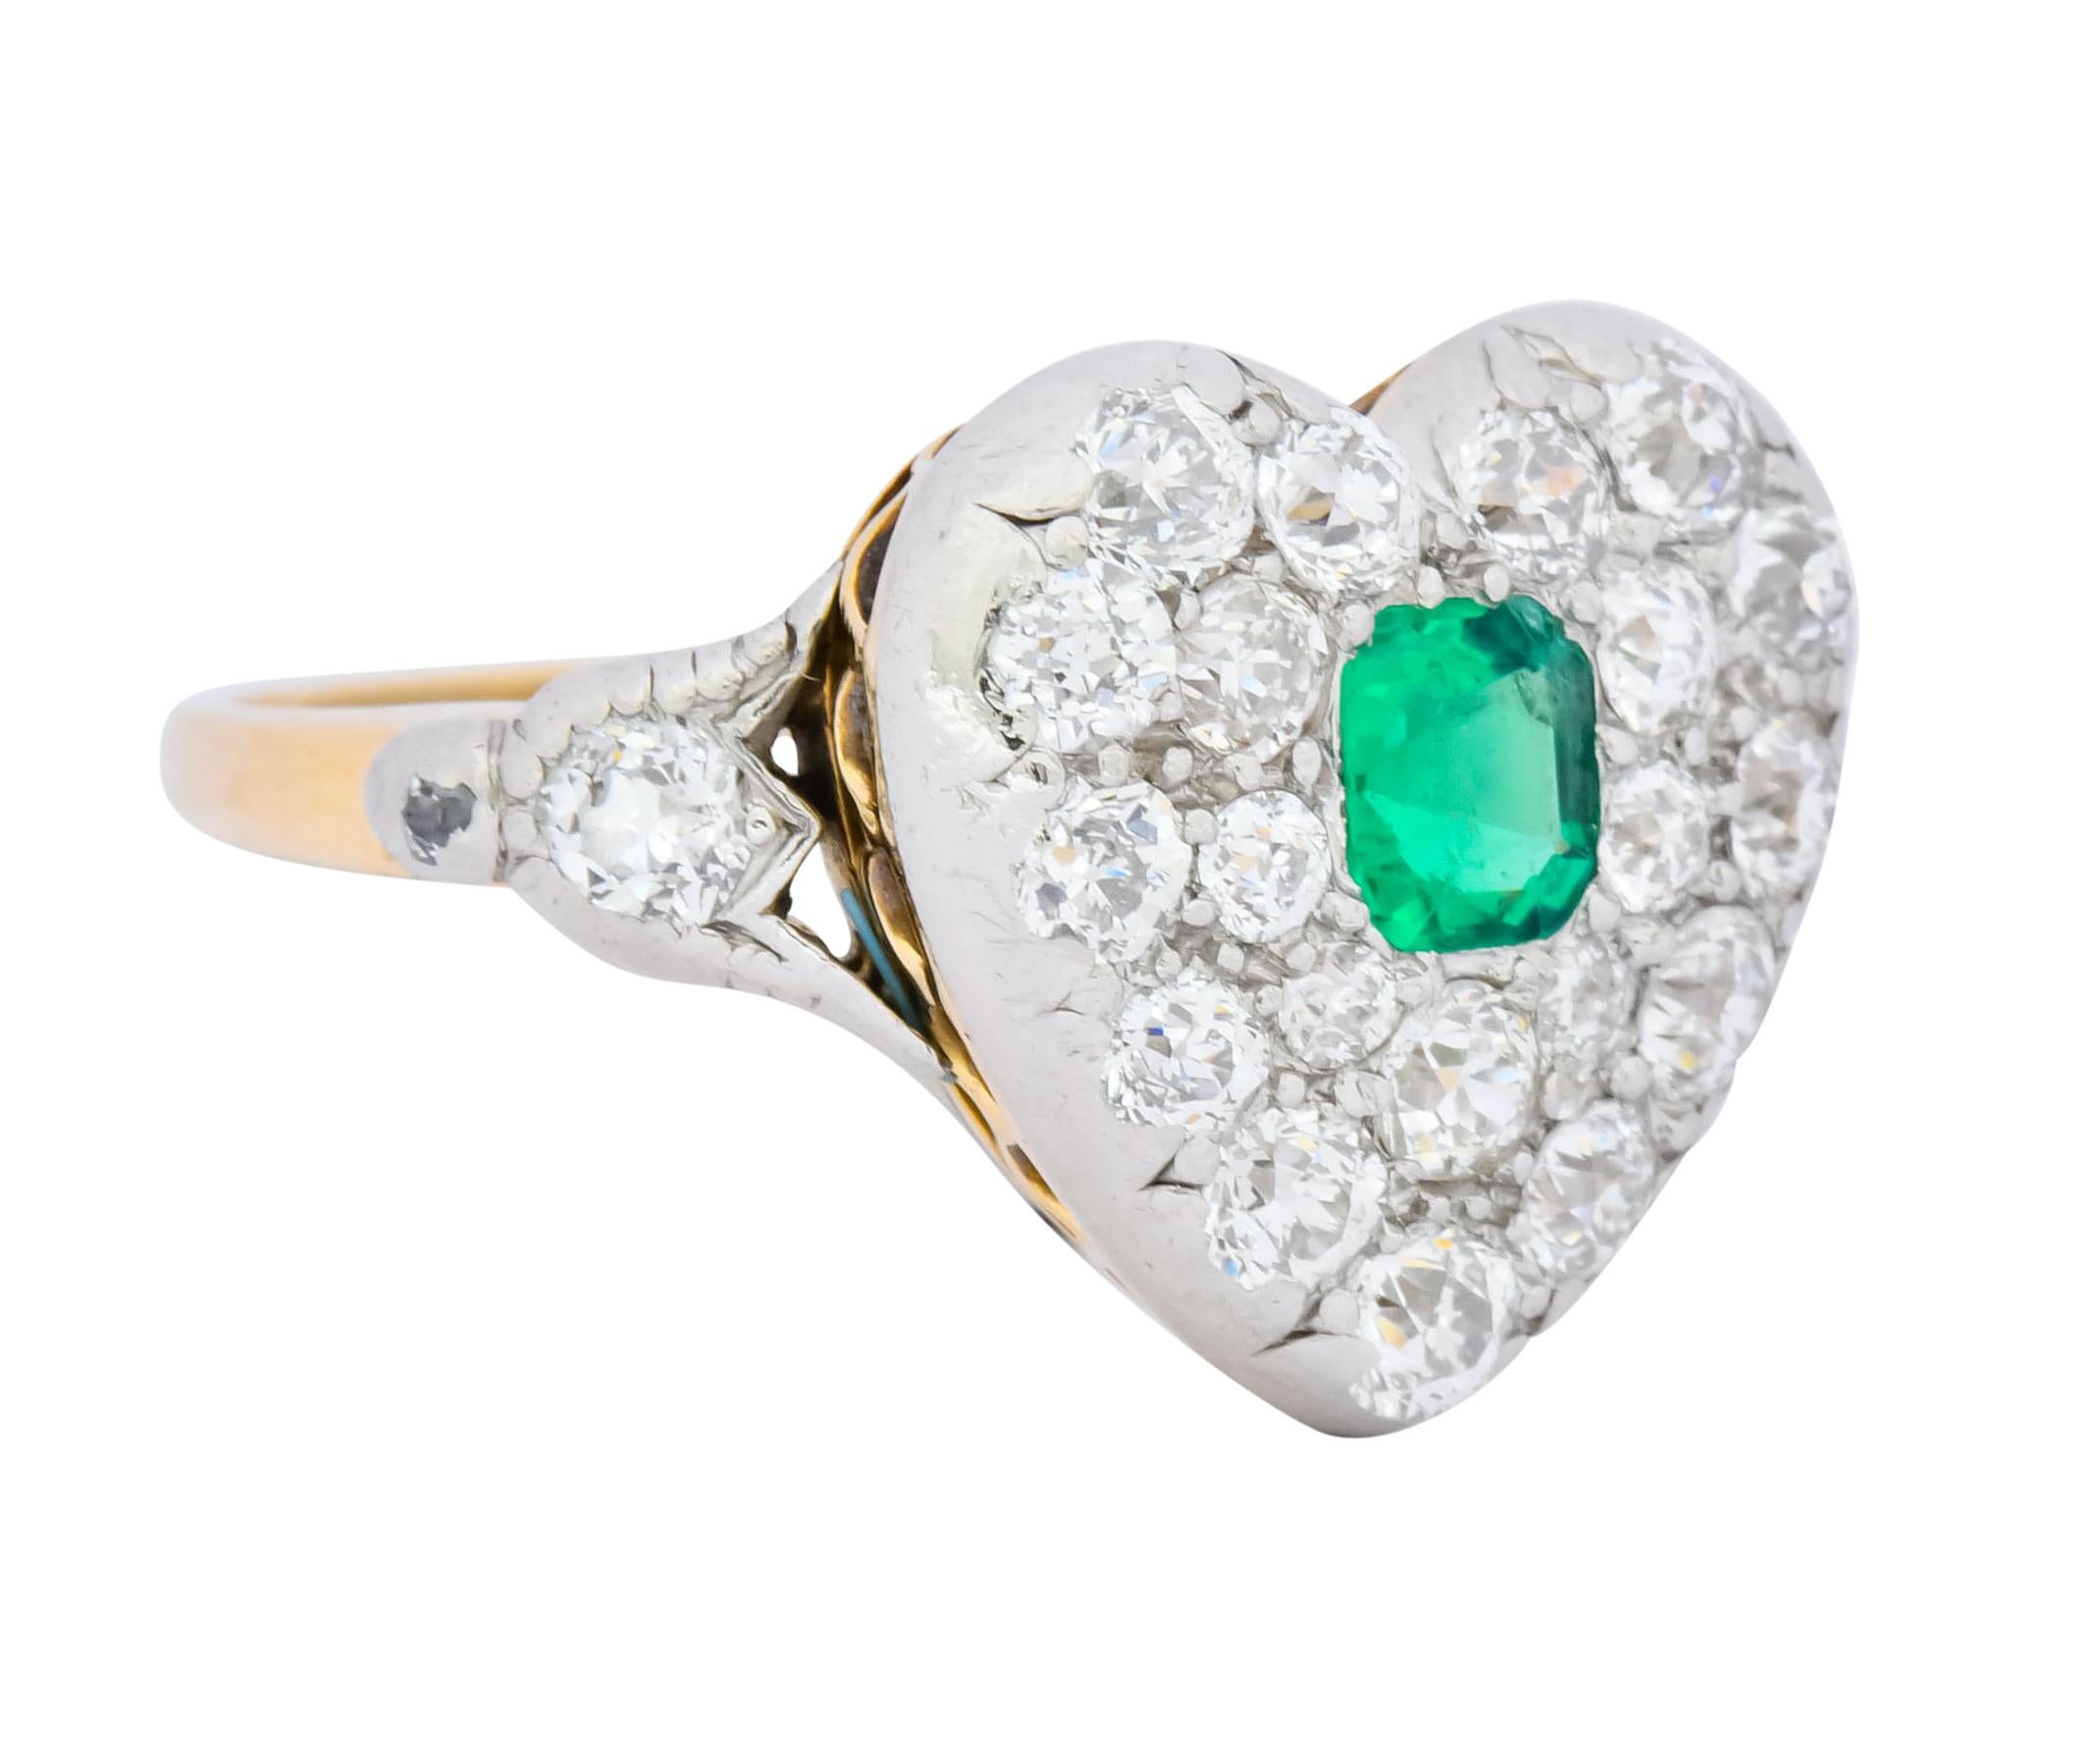 Cluster style ring shaped as a heart centering a rectangular step cut emerald weighing approximately 0.25 carat, transparent and a bright saturated green

Surrounded by old European cut diamonds weighing approximately 1.17 carats, G/H color and VS